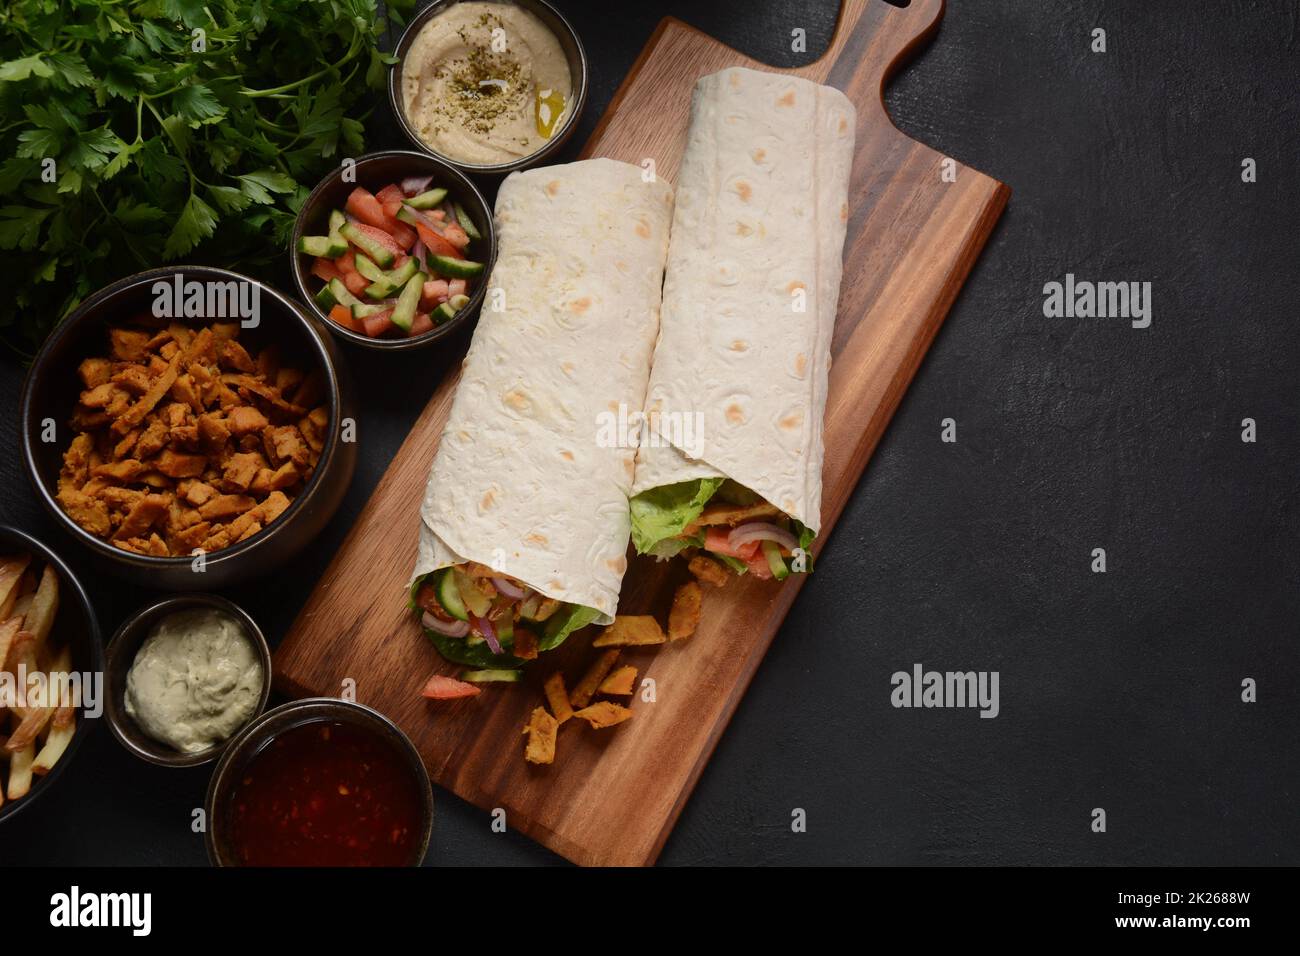 Shawarma Rolled Sandwich with Sauce and vegetables, Arab Traditional Food. Shawarma Doner kebab wrap with chicken, fries and pickles. Israeli Traditional homemade Shawarma on wooden cutting board. Stock Photo